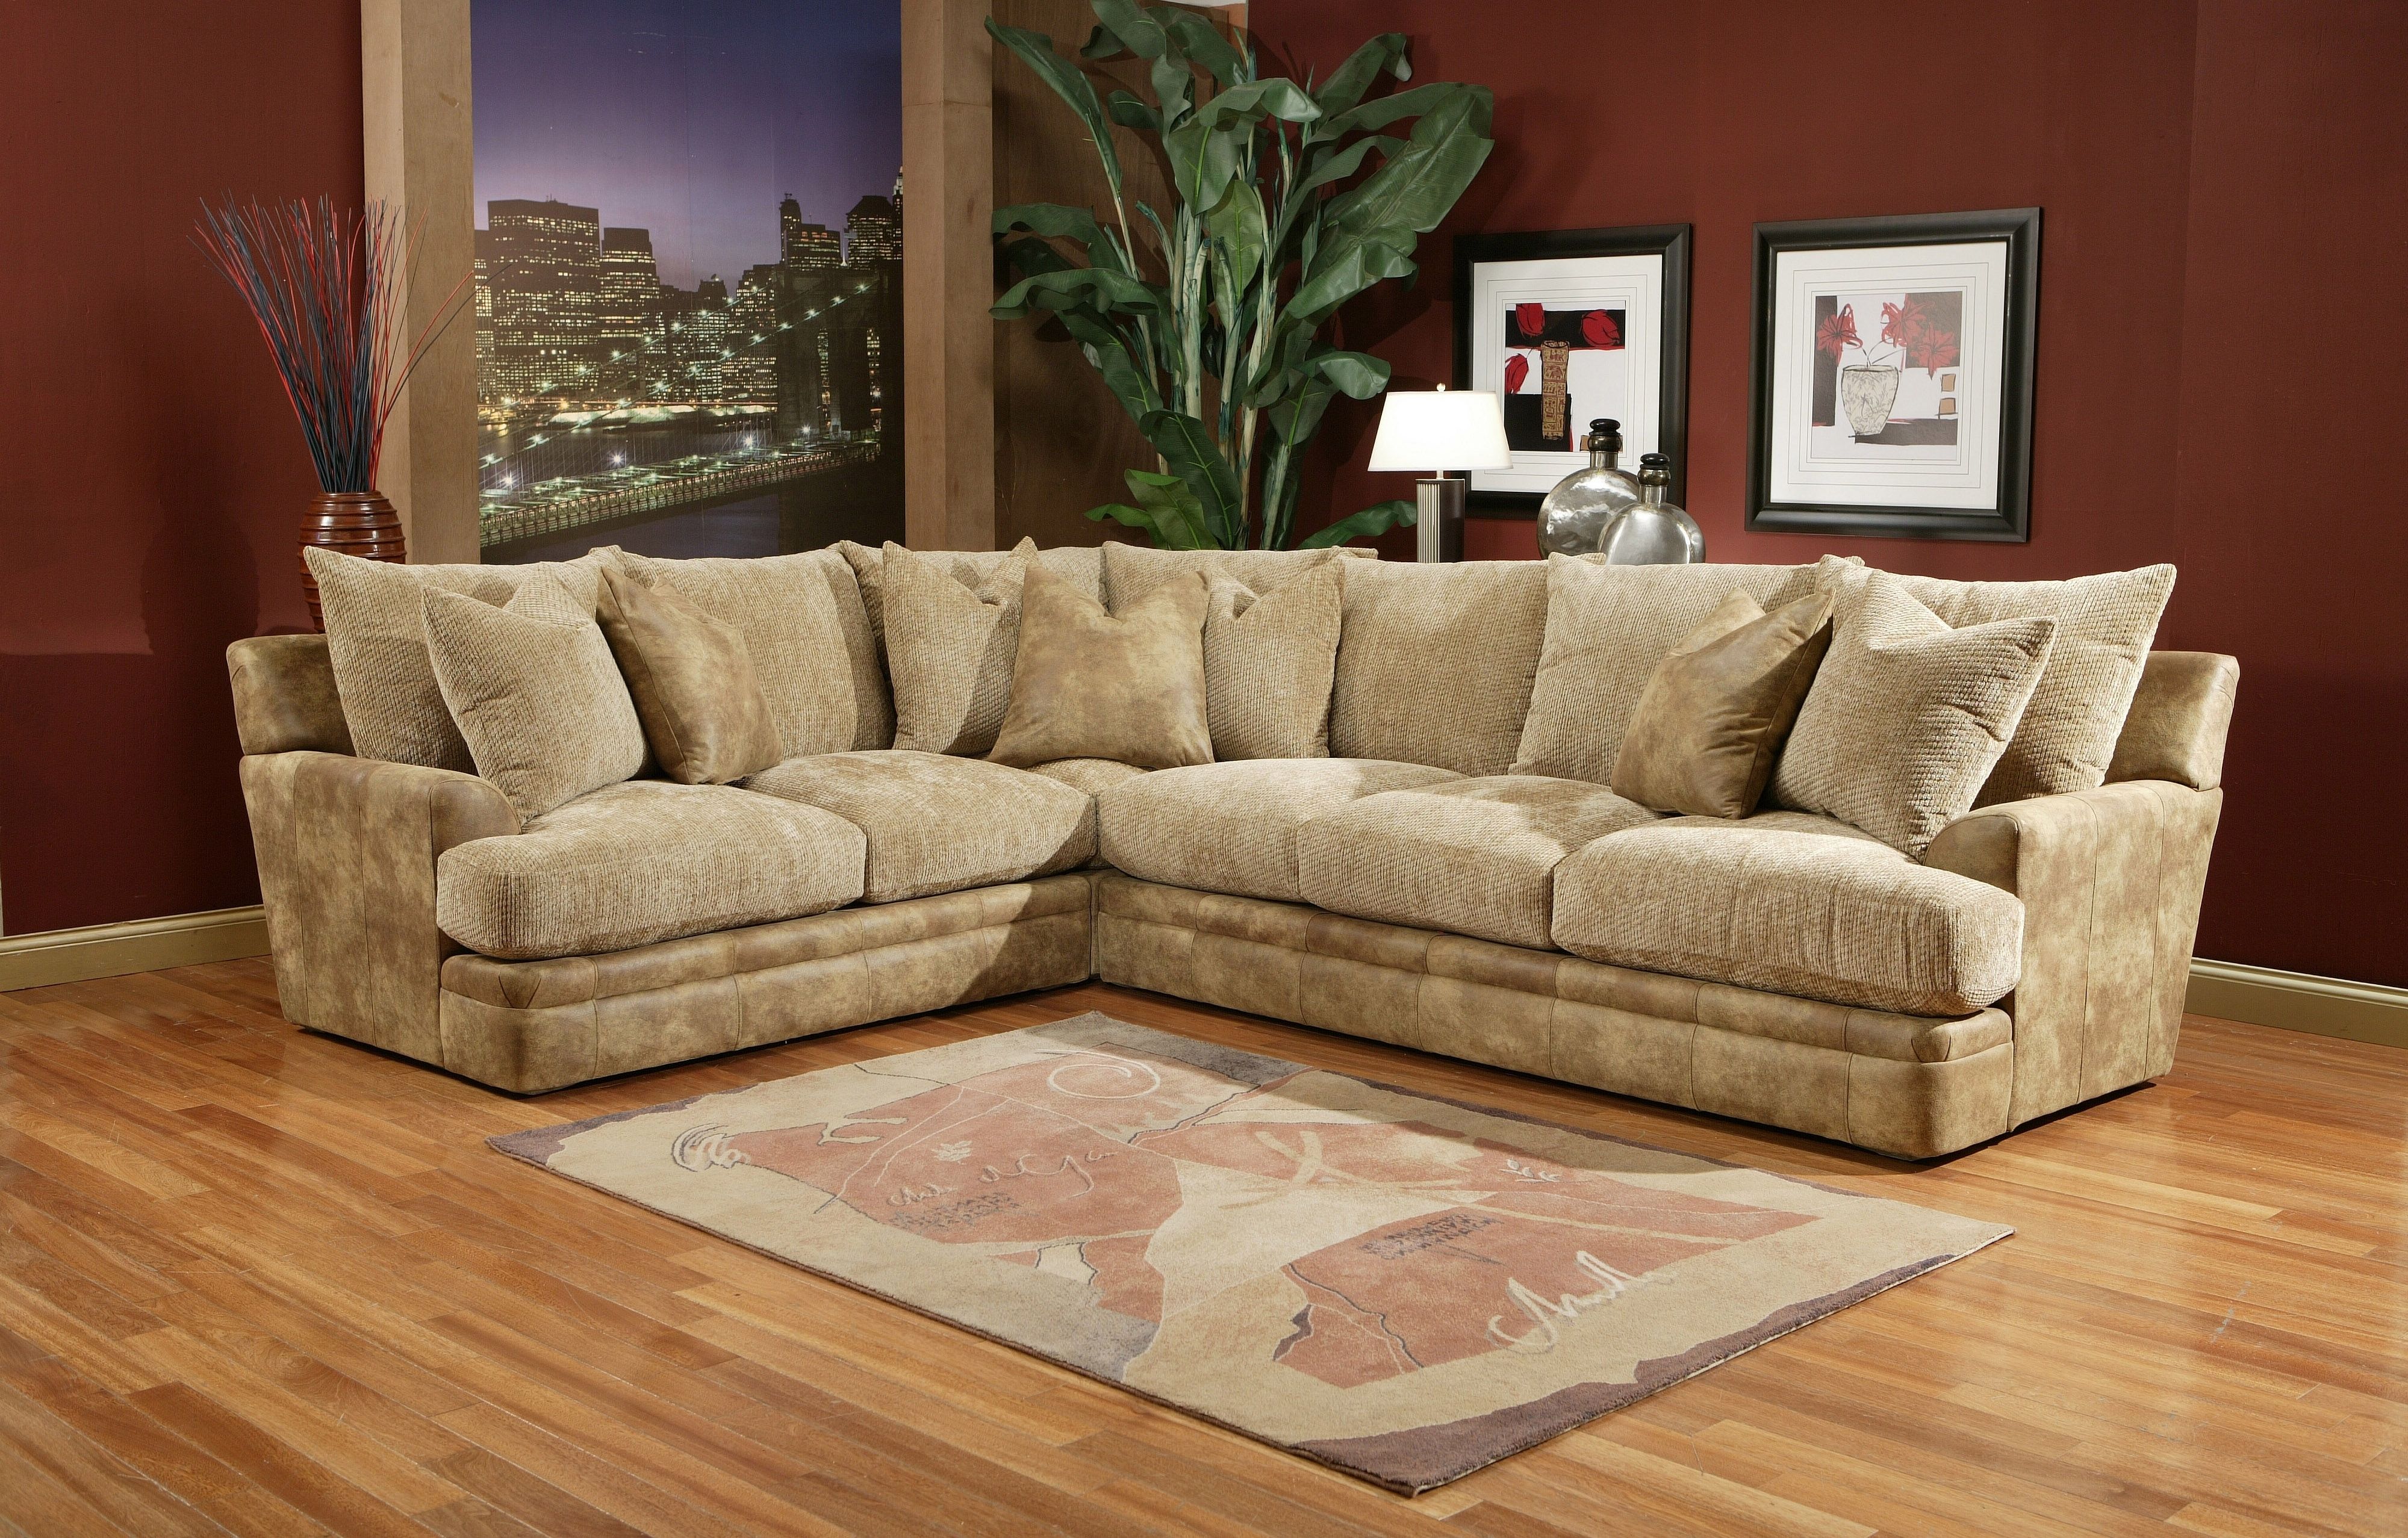 Inspirational Down Sectional Sofa 45 With Additional Modern Sofa With Regard To Down Sectional Sofas (Photo 4 of 10)